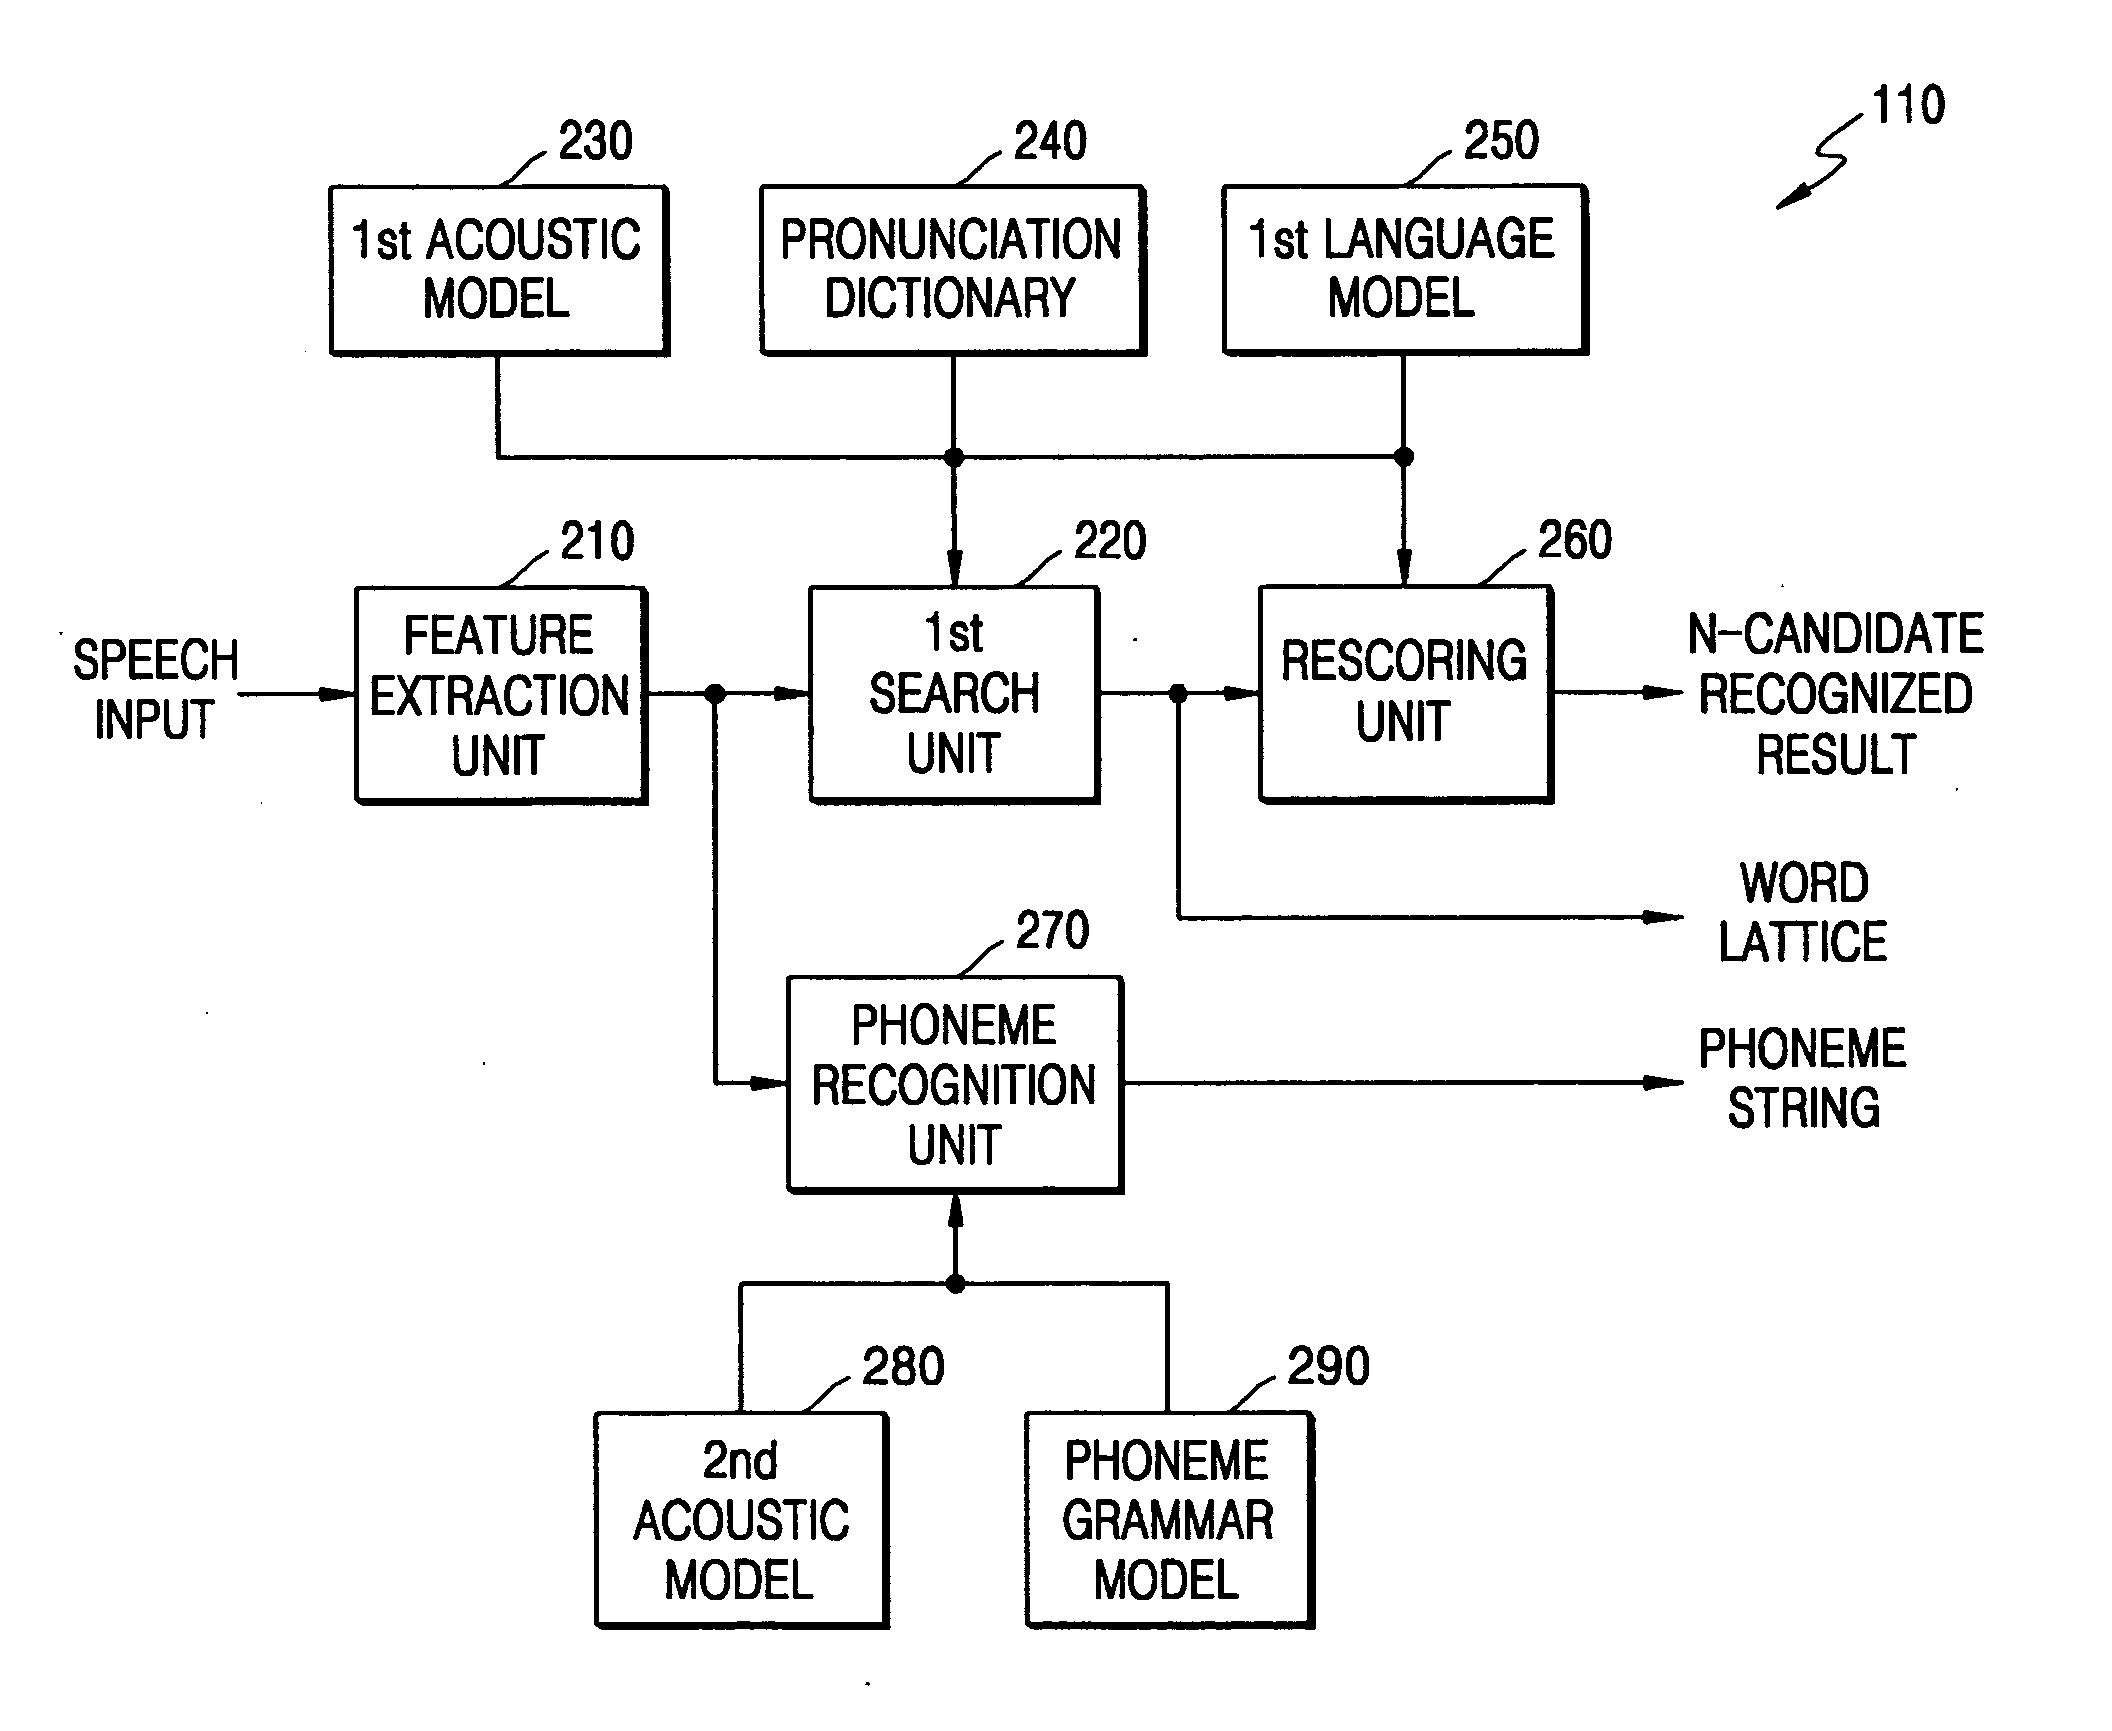 Domain-based dialog speech recognition method and apparatus